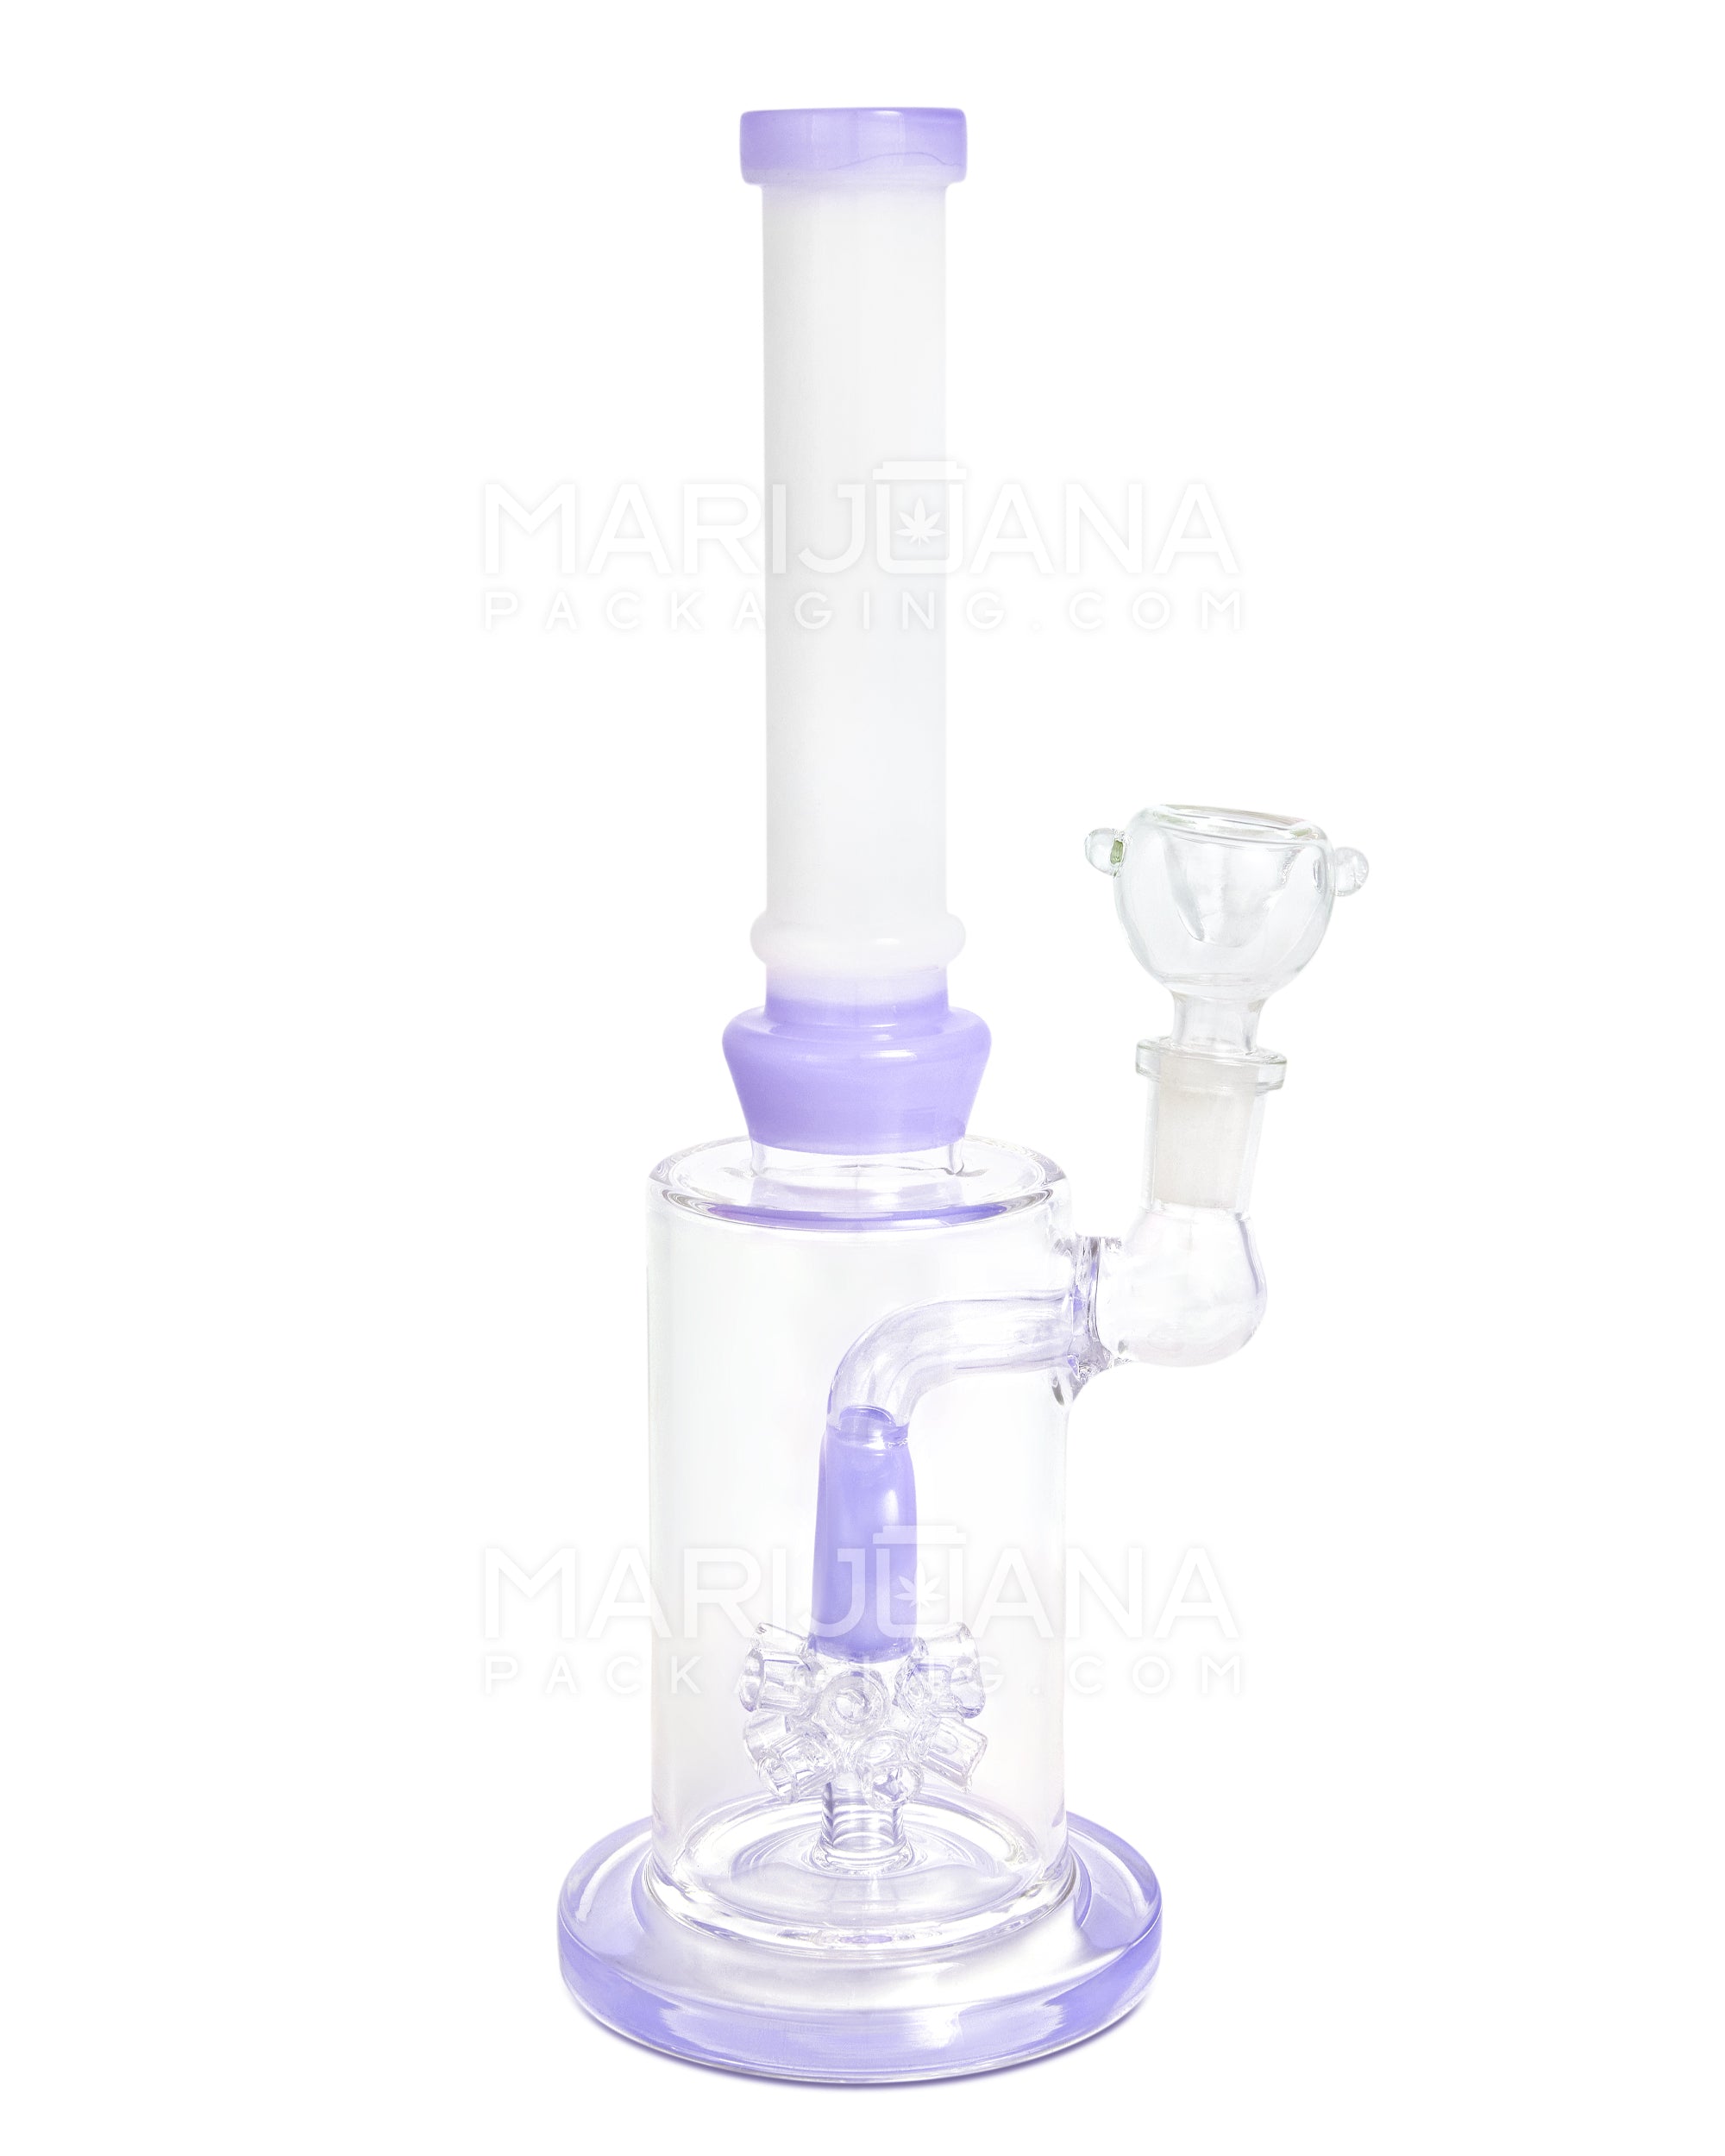 Straight Neck Atomic Donut Perc Glass Water Pipe w/ Thick Base | 10.5in Tall - 14mm Bowl - Milky Purple - 1